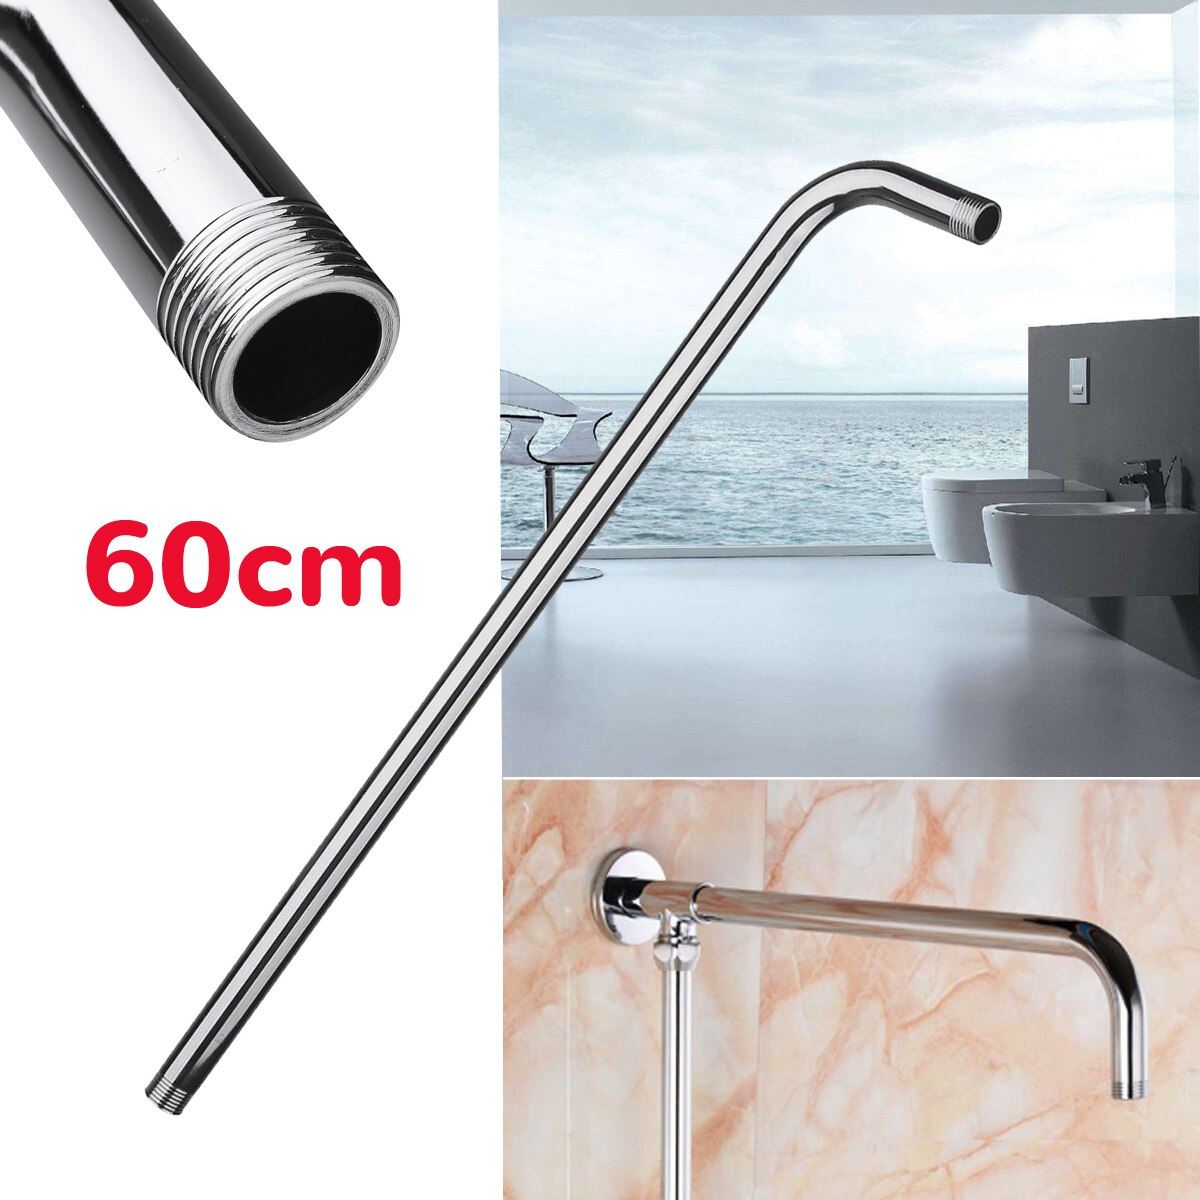 24inch Stainless Steel Wall Mounted Shower Extension Arm For Rainfall Shower Head Shower Arms Bathroom Tools Accessories